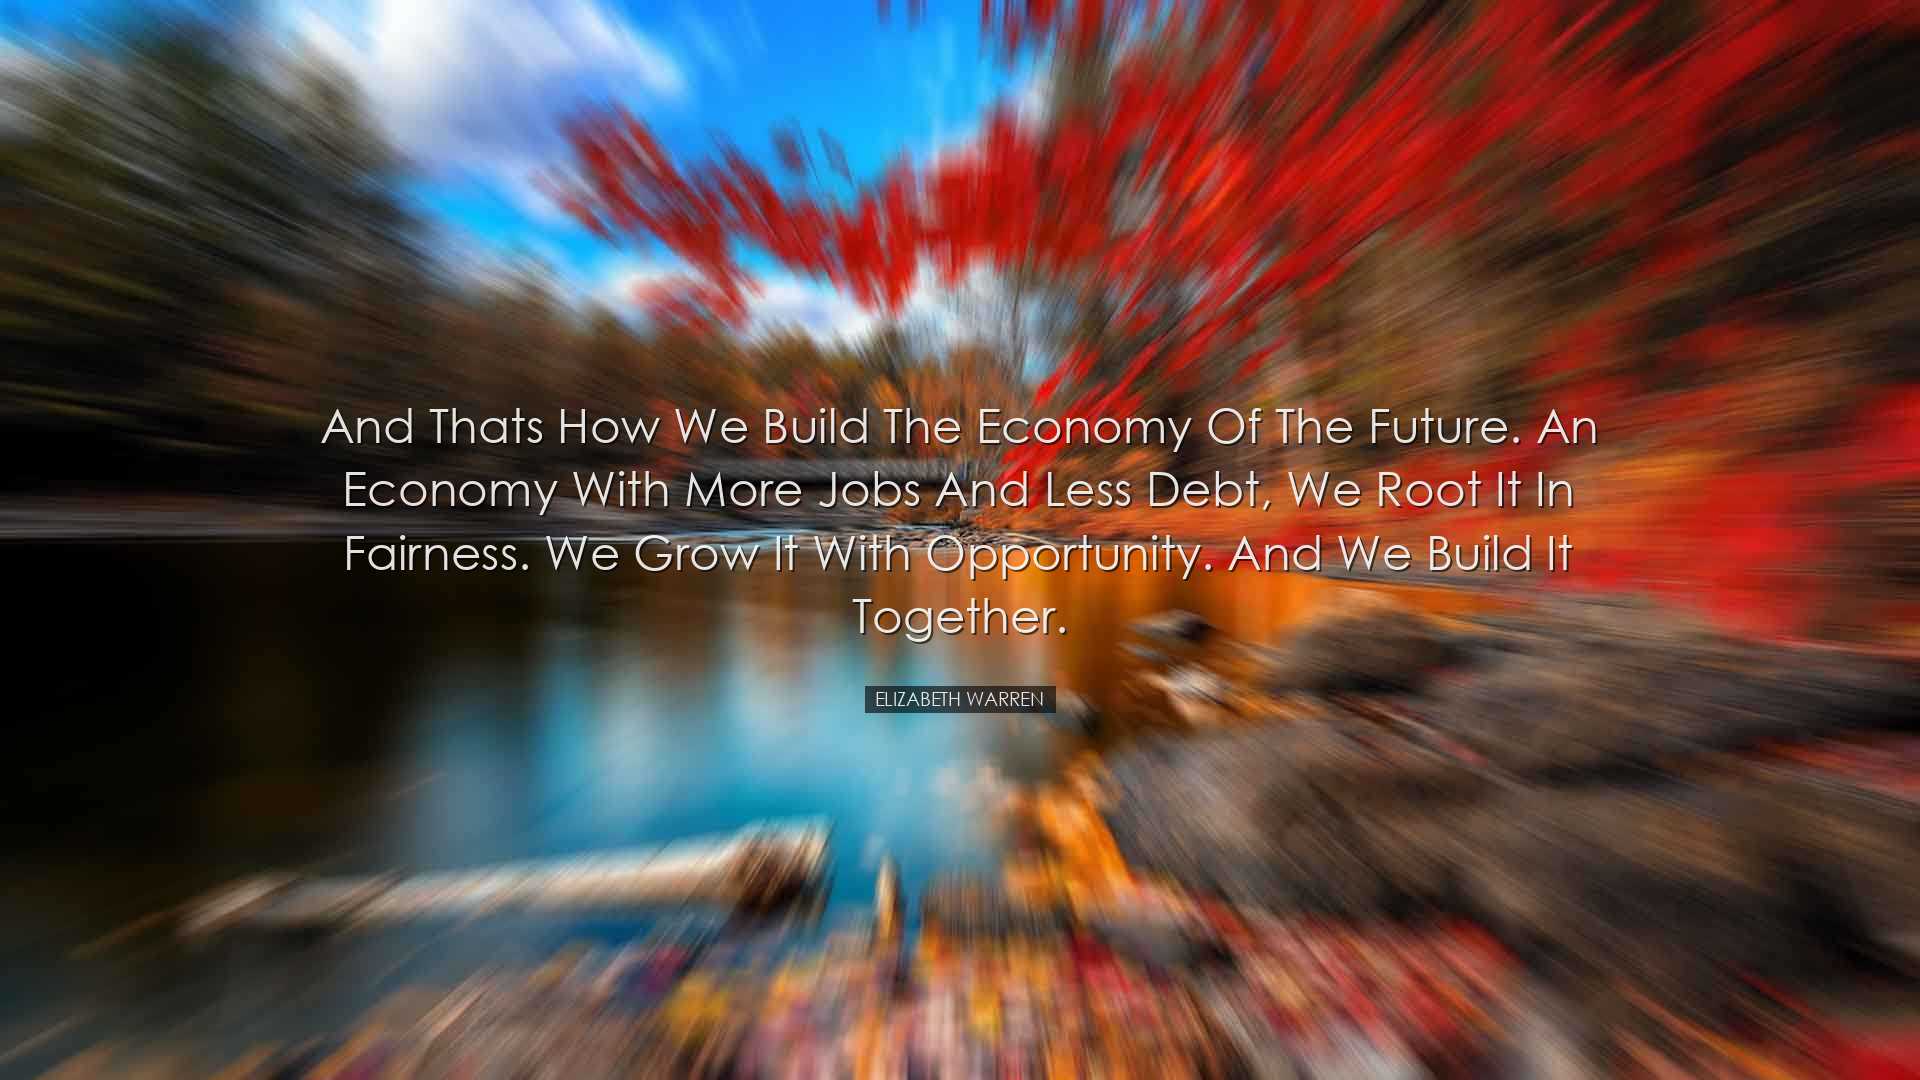 And thats how we build the economy of the future. An economy with